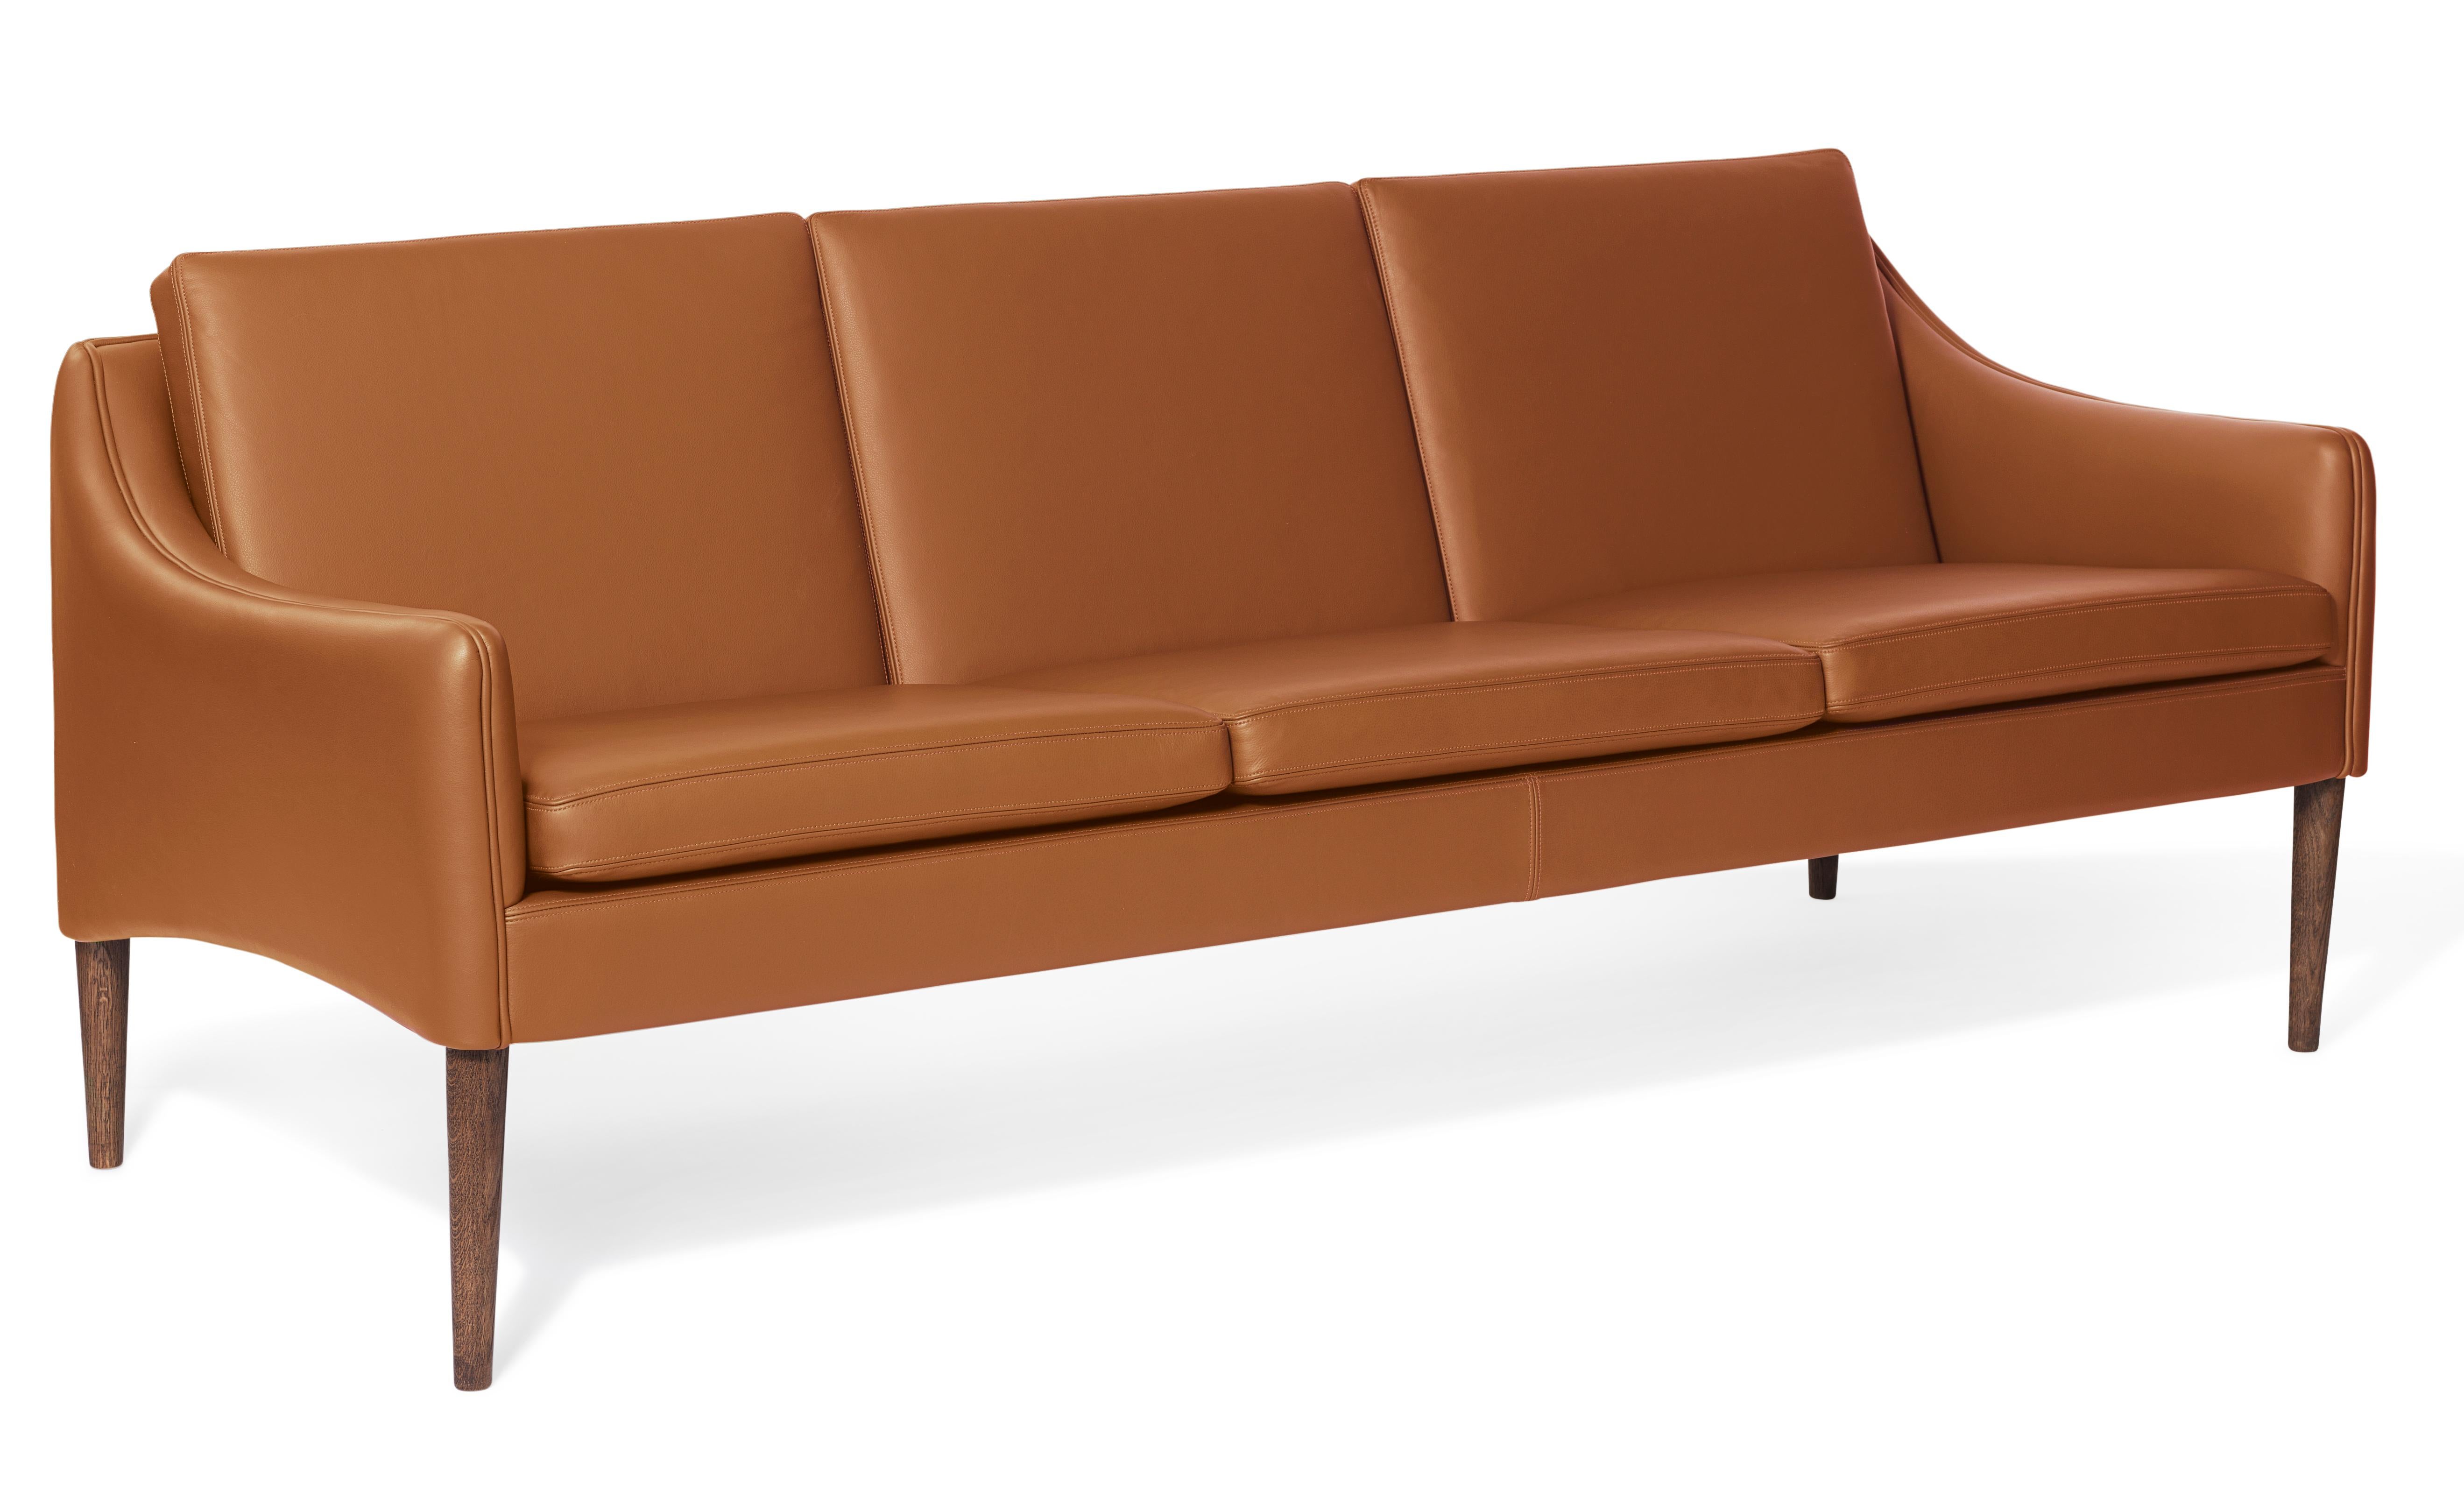 For Sale: Brown (Challenger Cognac) Mr. Olsen 3-Seat Sofa with Smoked Oak Legs, by Hans Olsen from Warm Nordic 2